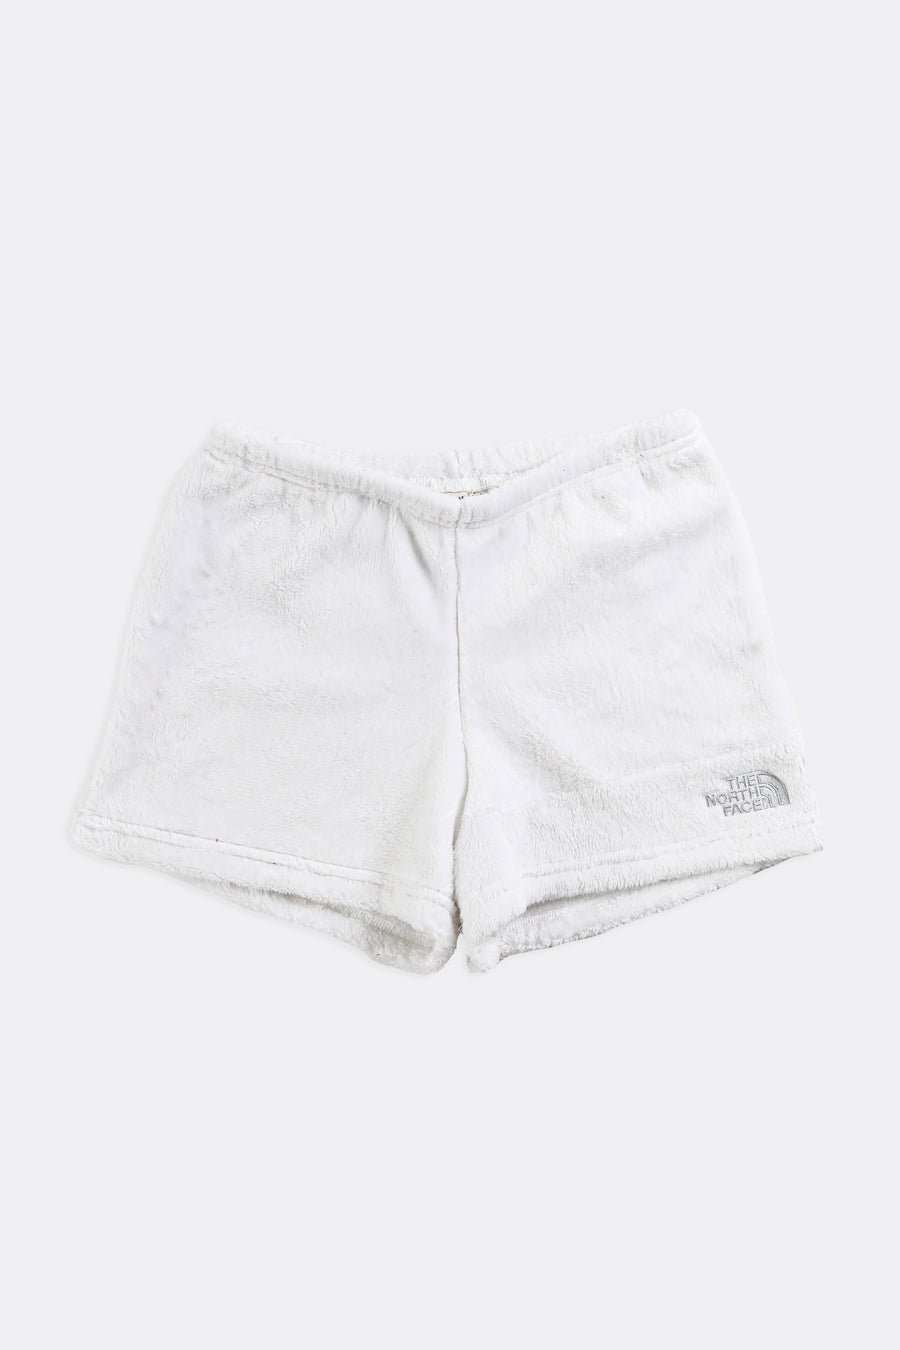 Rework North Face Fuzzy Shorts - S